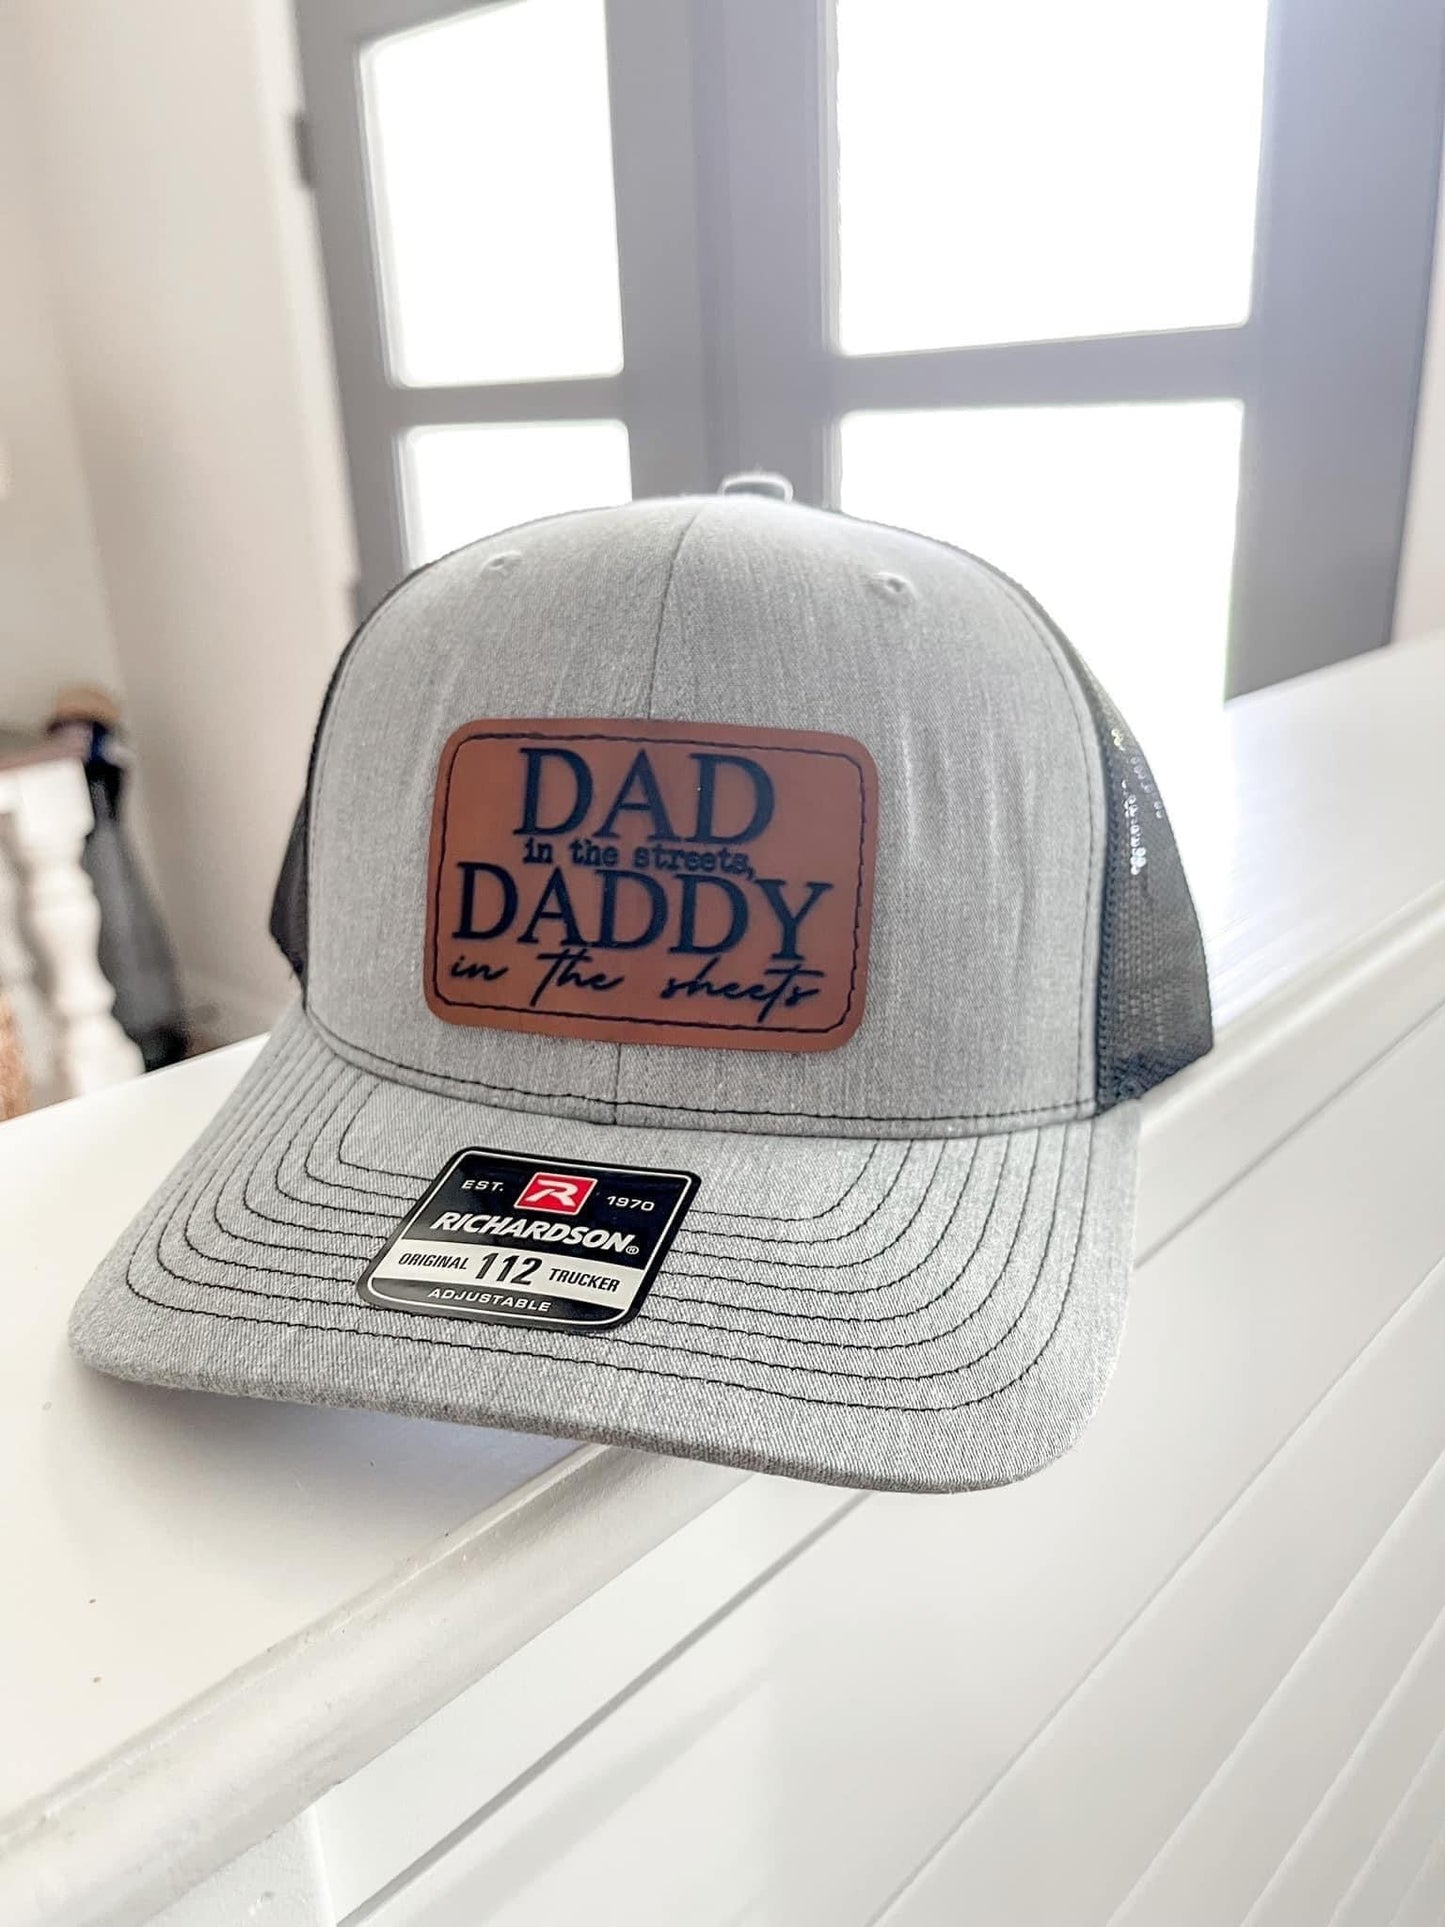 Dad in the streets, Daddy in the sheets Hat